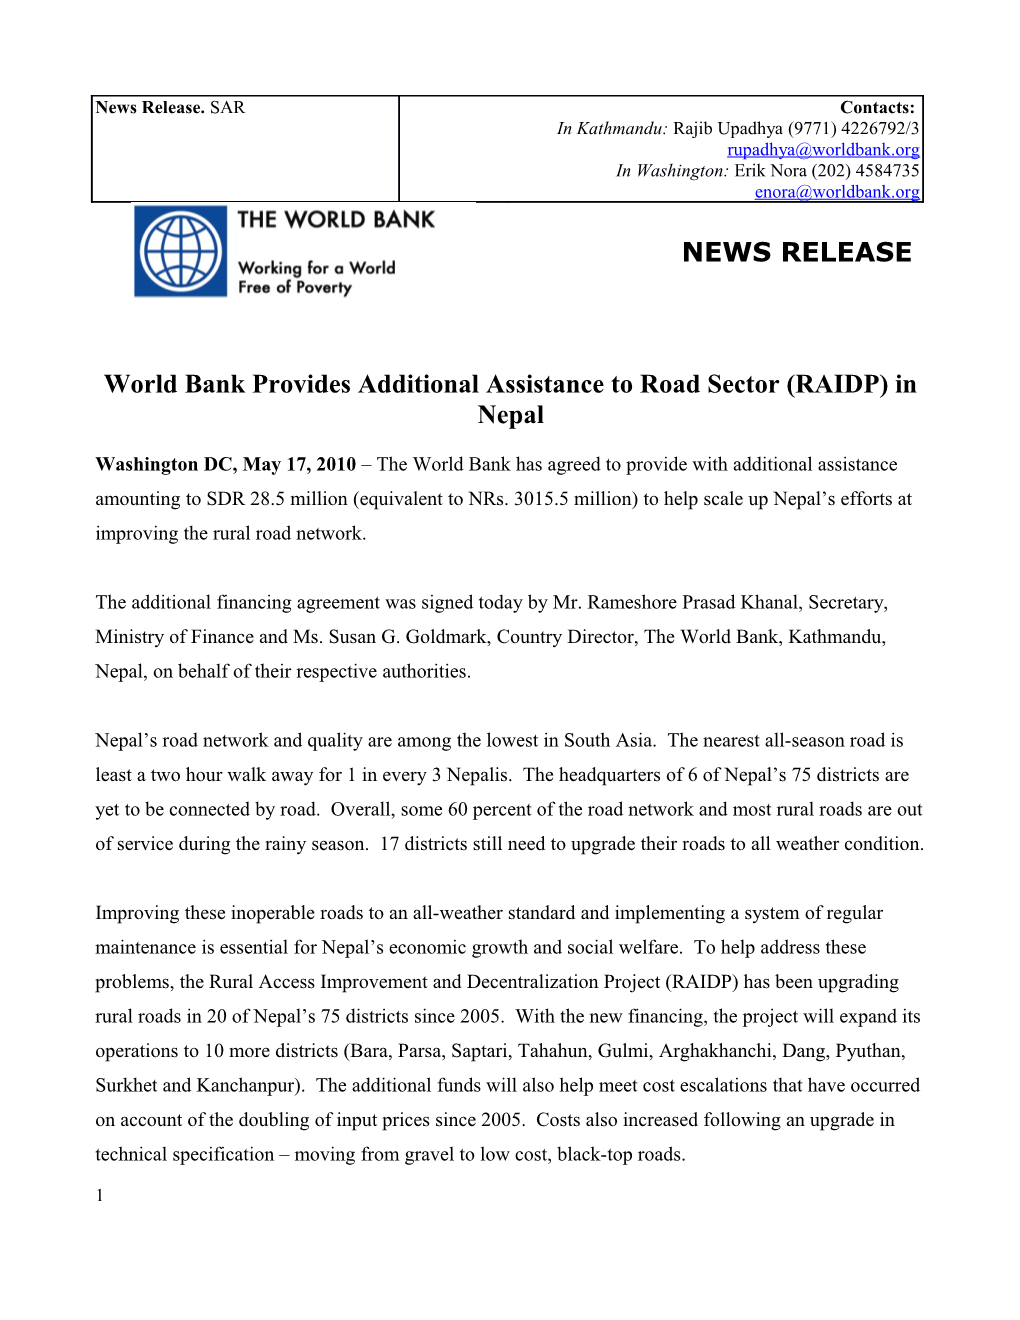 World Bank Provides Additional Assistance to Road Sector (RAIDP) in Nepal